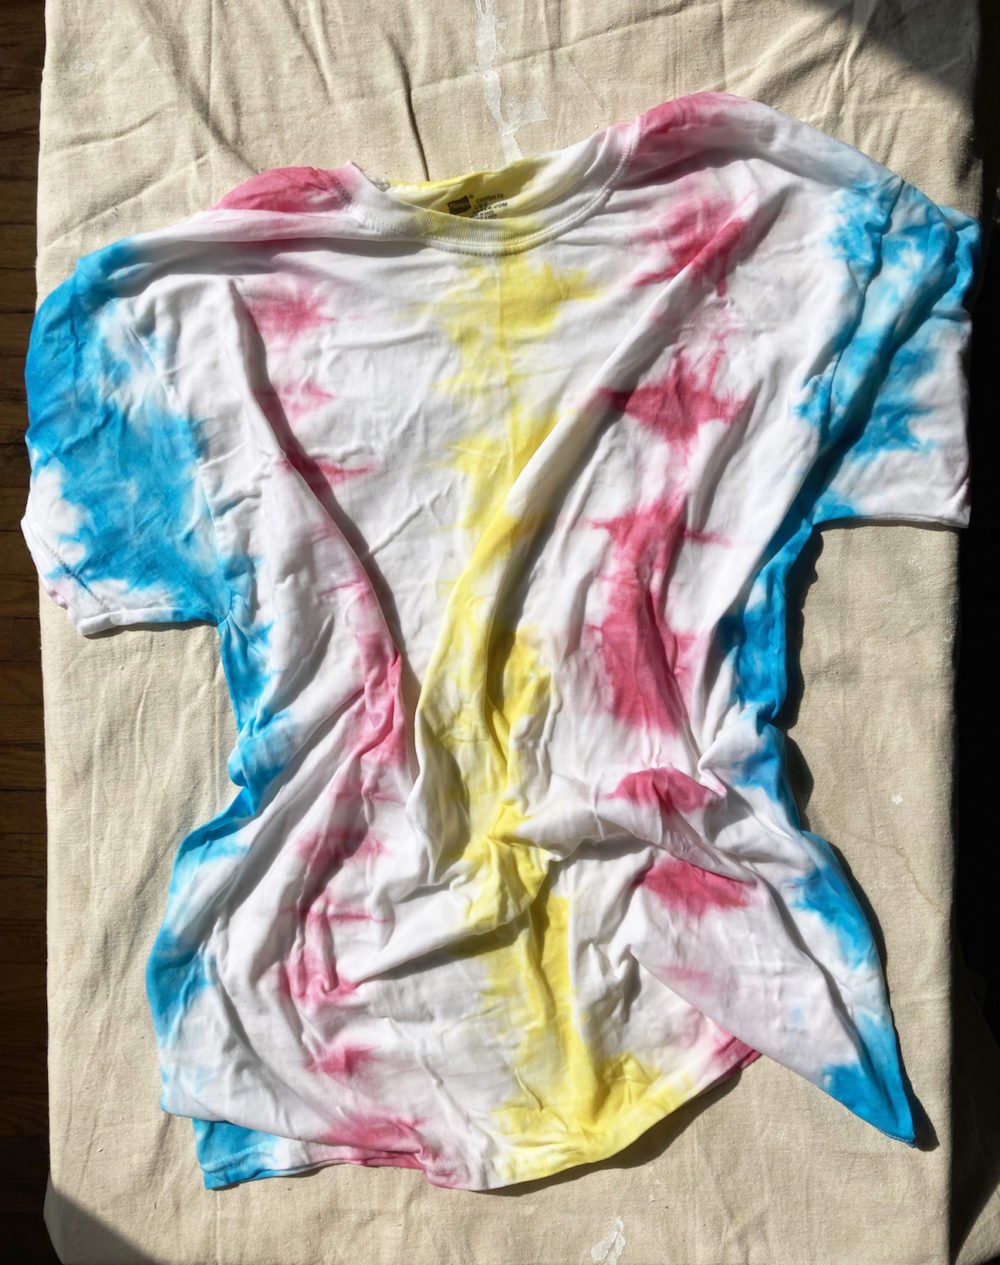 A rinsed tie-dyed t shirt ready to be dried